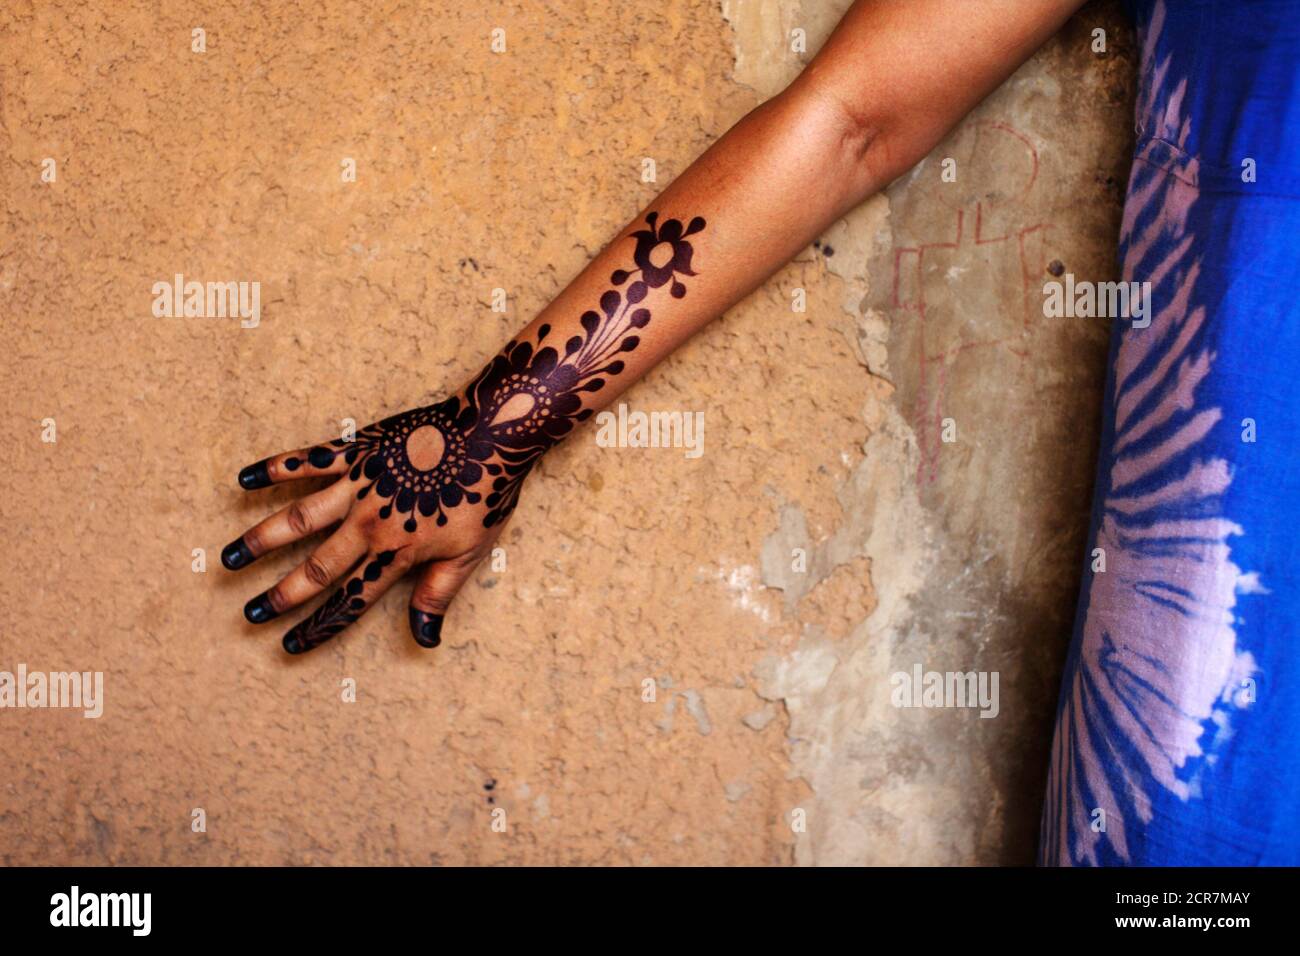 A woman shows off her finished tattoos done in the Chadian style at henna  tattoo artist Salimatou Lamidou's house and studio in Niamey September 20,  2013. In Niger, women pay up to